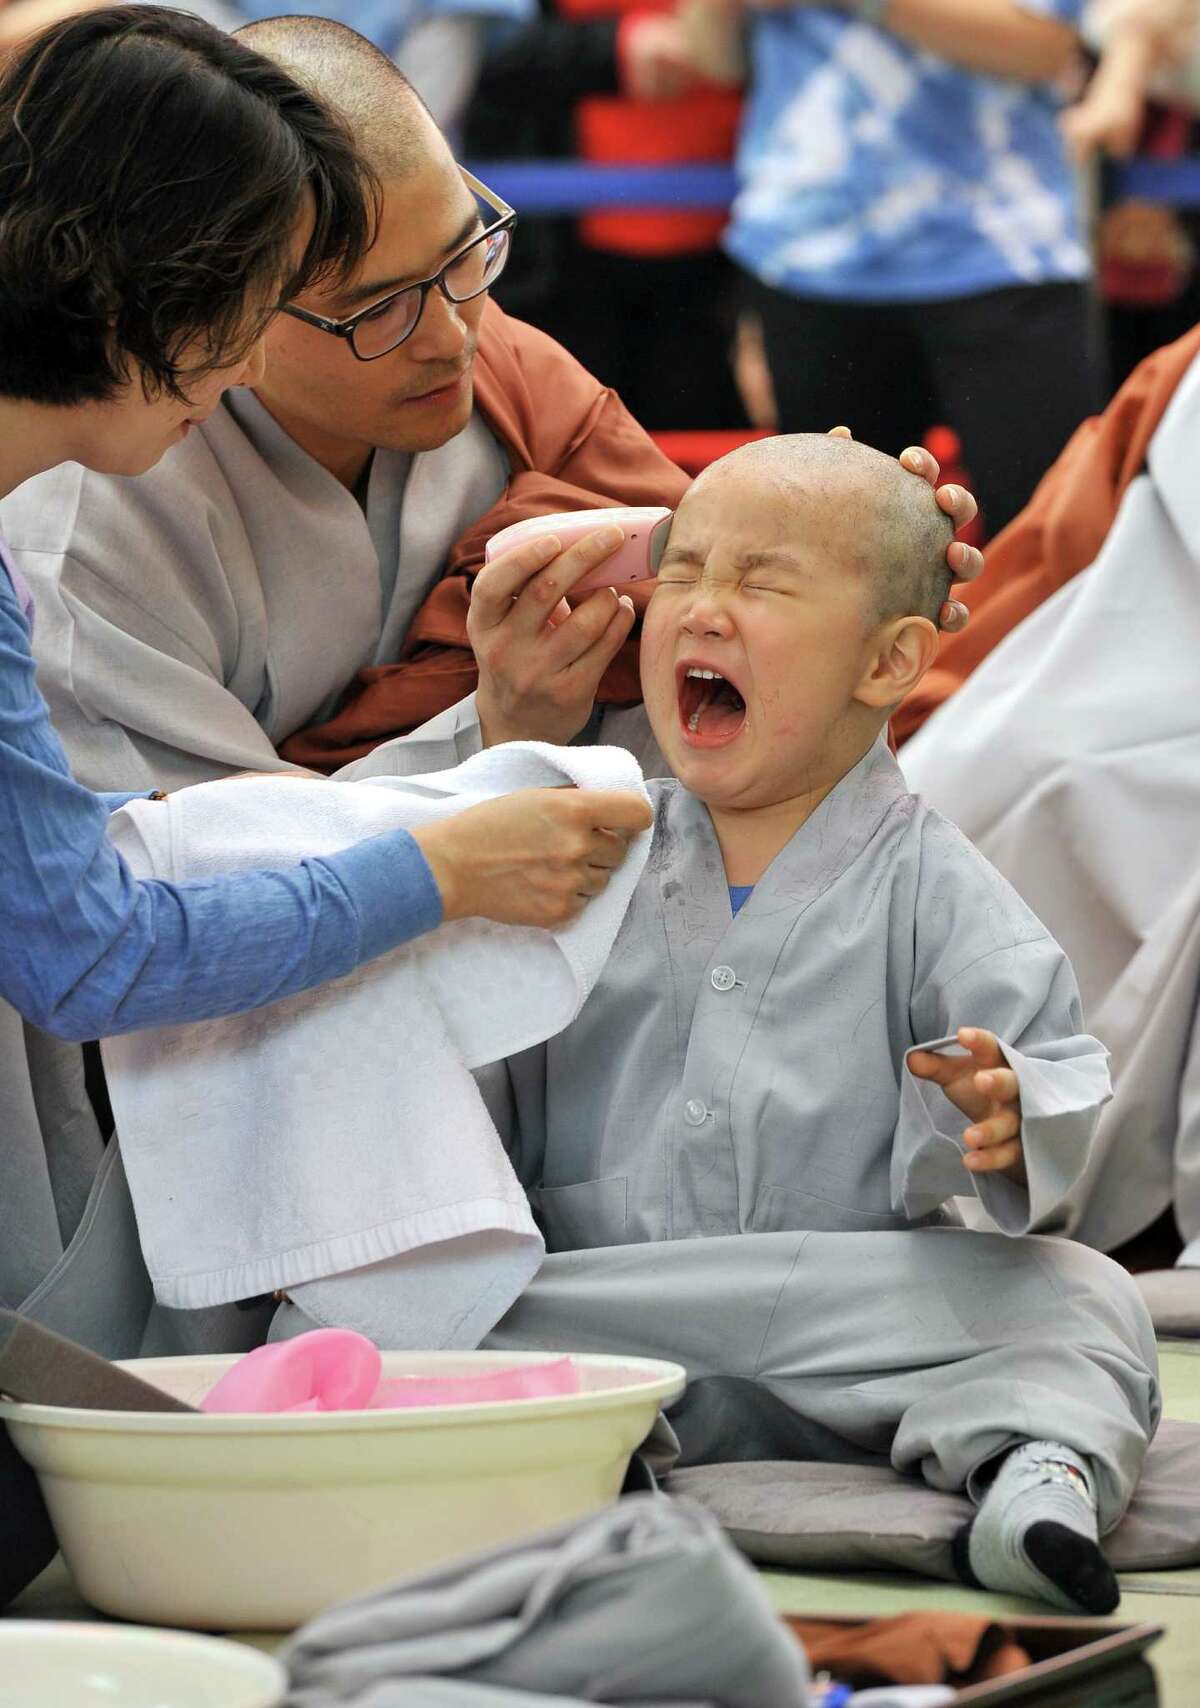 A South Korean boy cries as he gets his head shaved by a Buddhist monk during a "Children Becoming Buddhist monks" ceremony at Jogye temple in Seoul on May 13, 2012. The 9 children will stay at the temple to learn about Buddhism for 20 days ahead of celebrations for Buddha's birthday on May 28 this year.